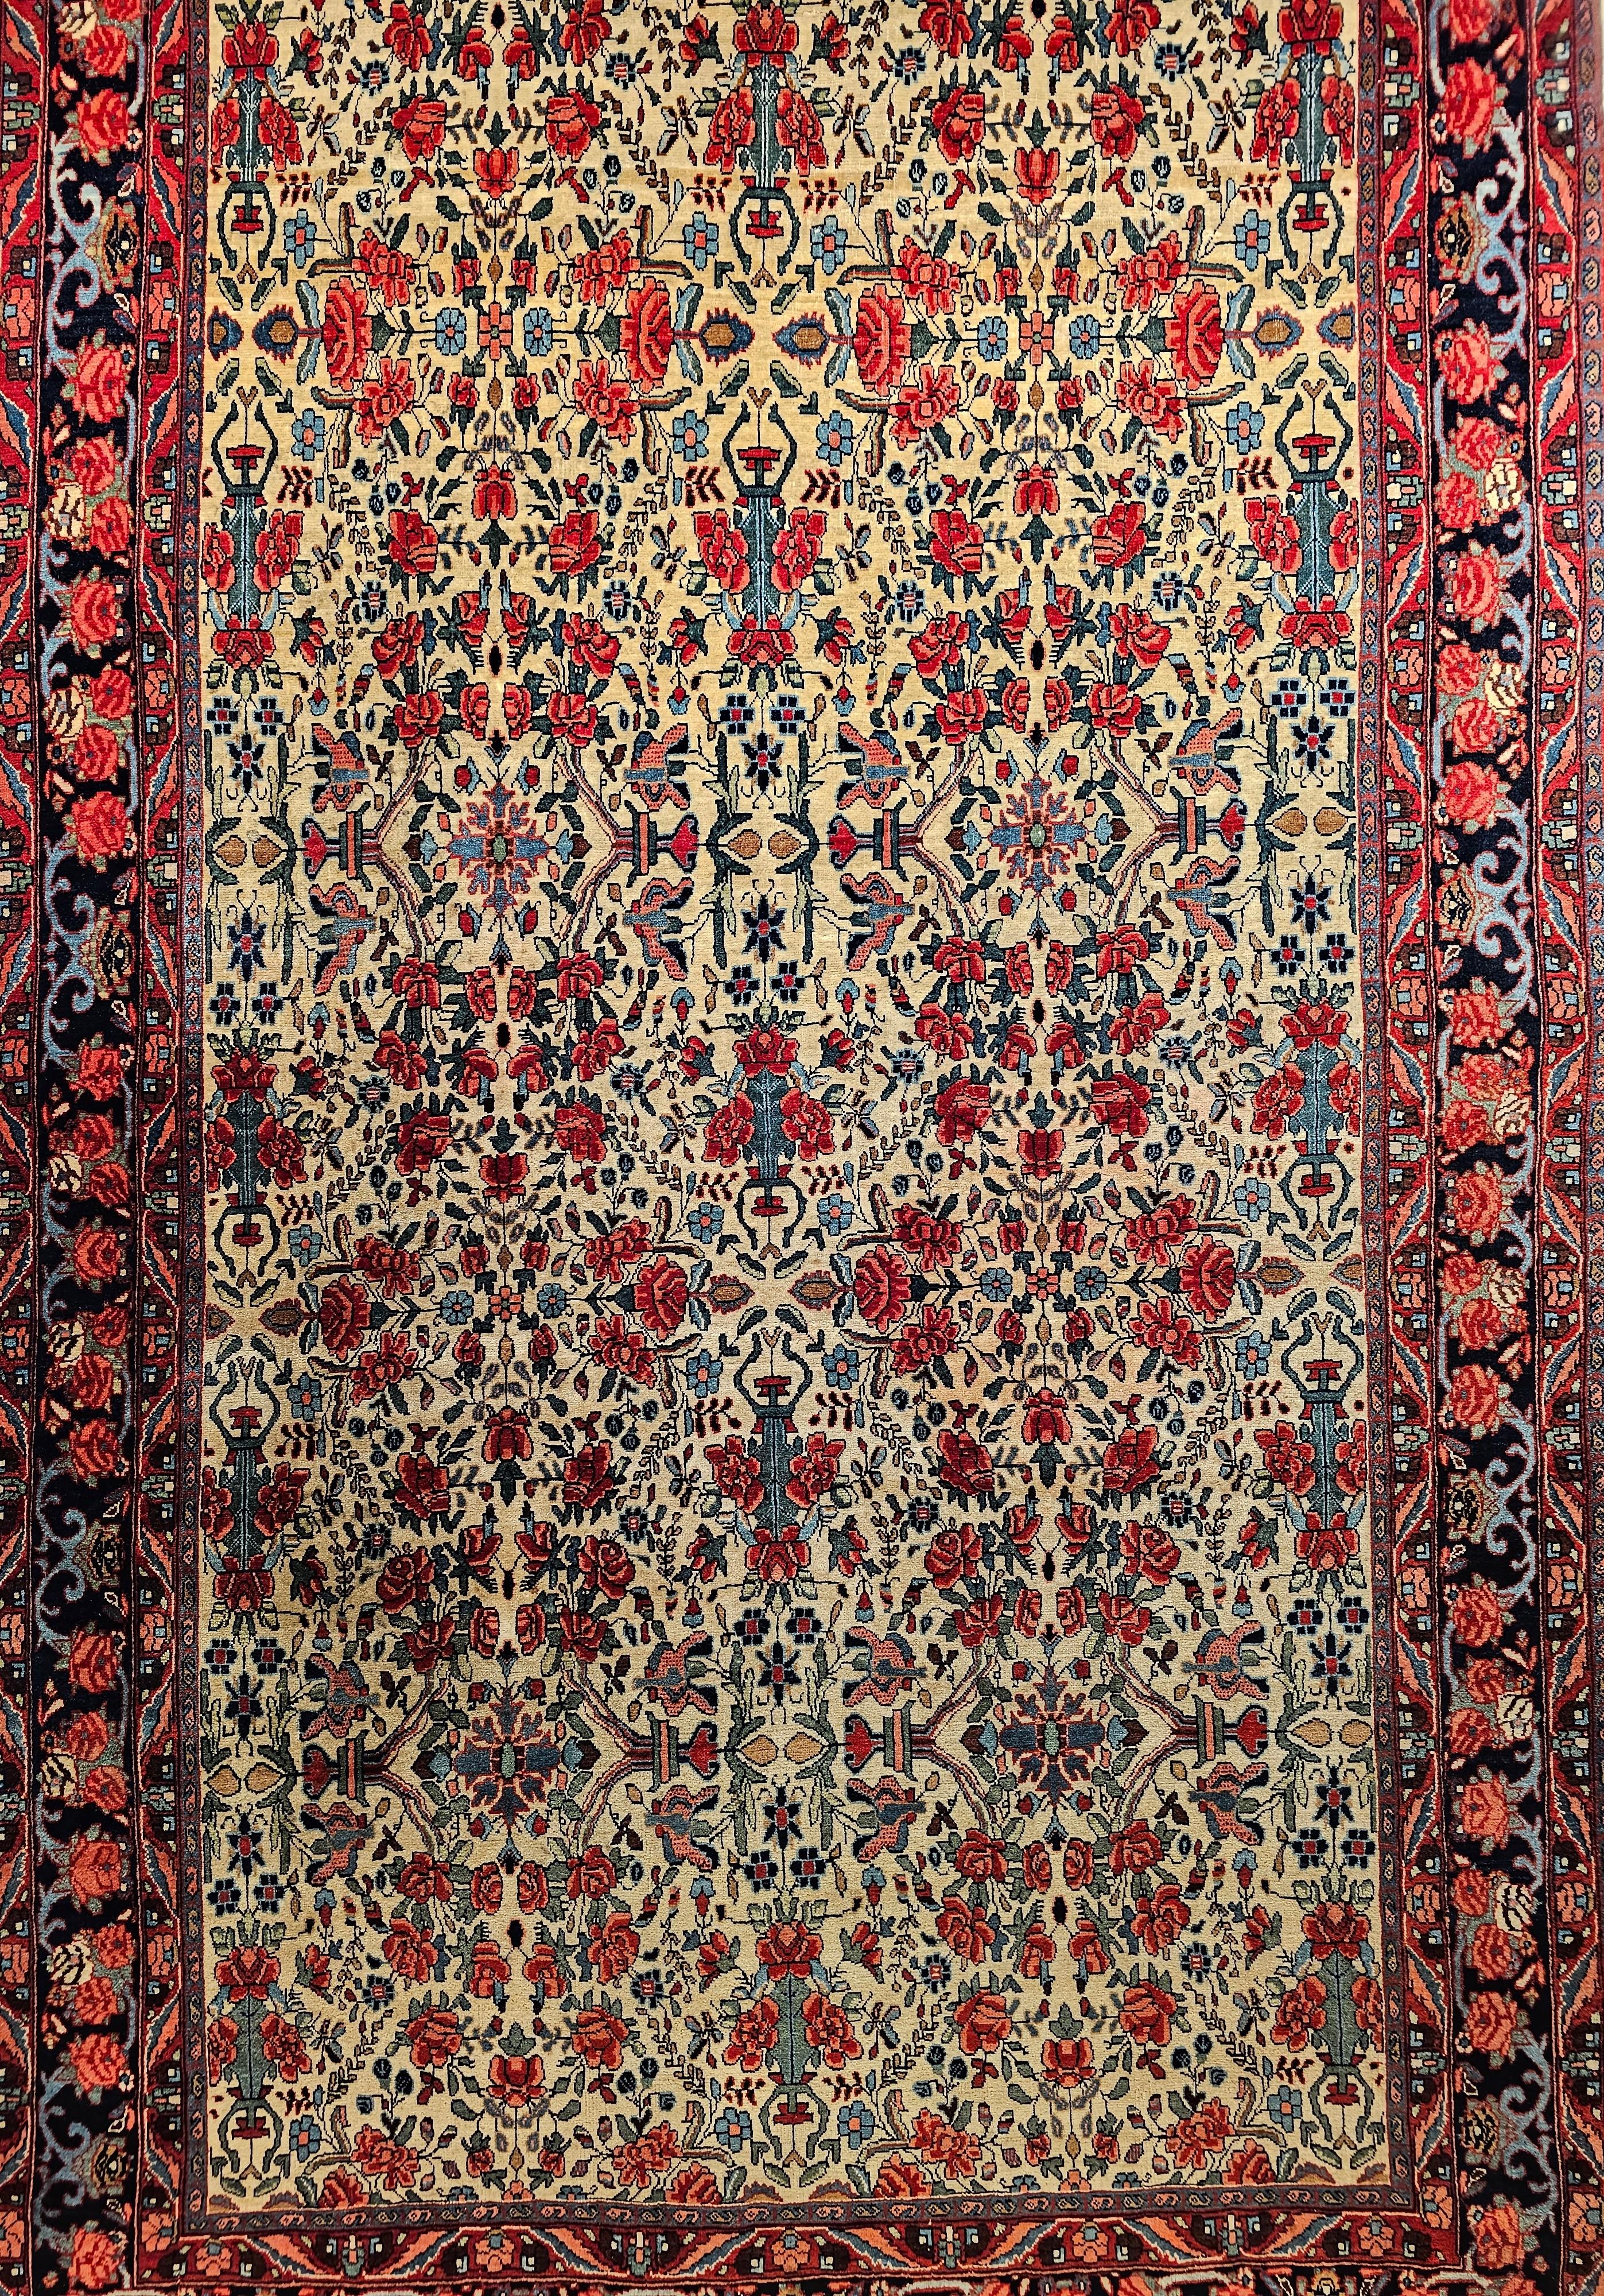 A Hand-Knotted Persian Bidjar in allover 